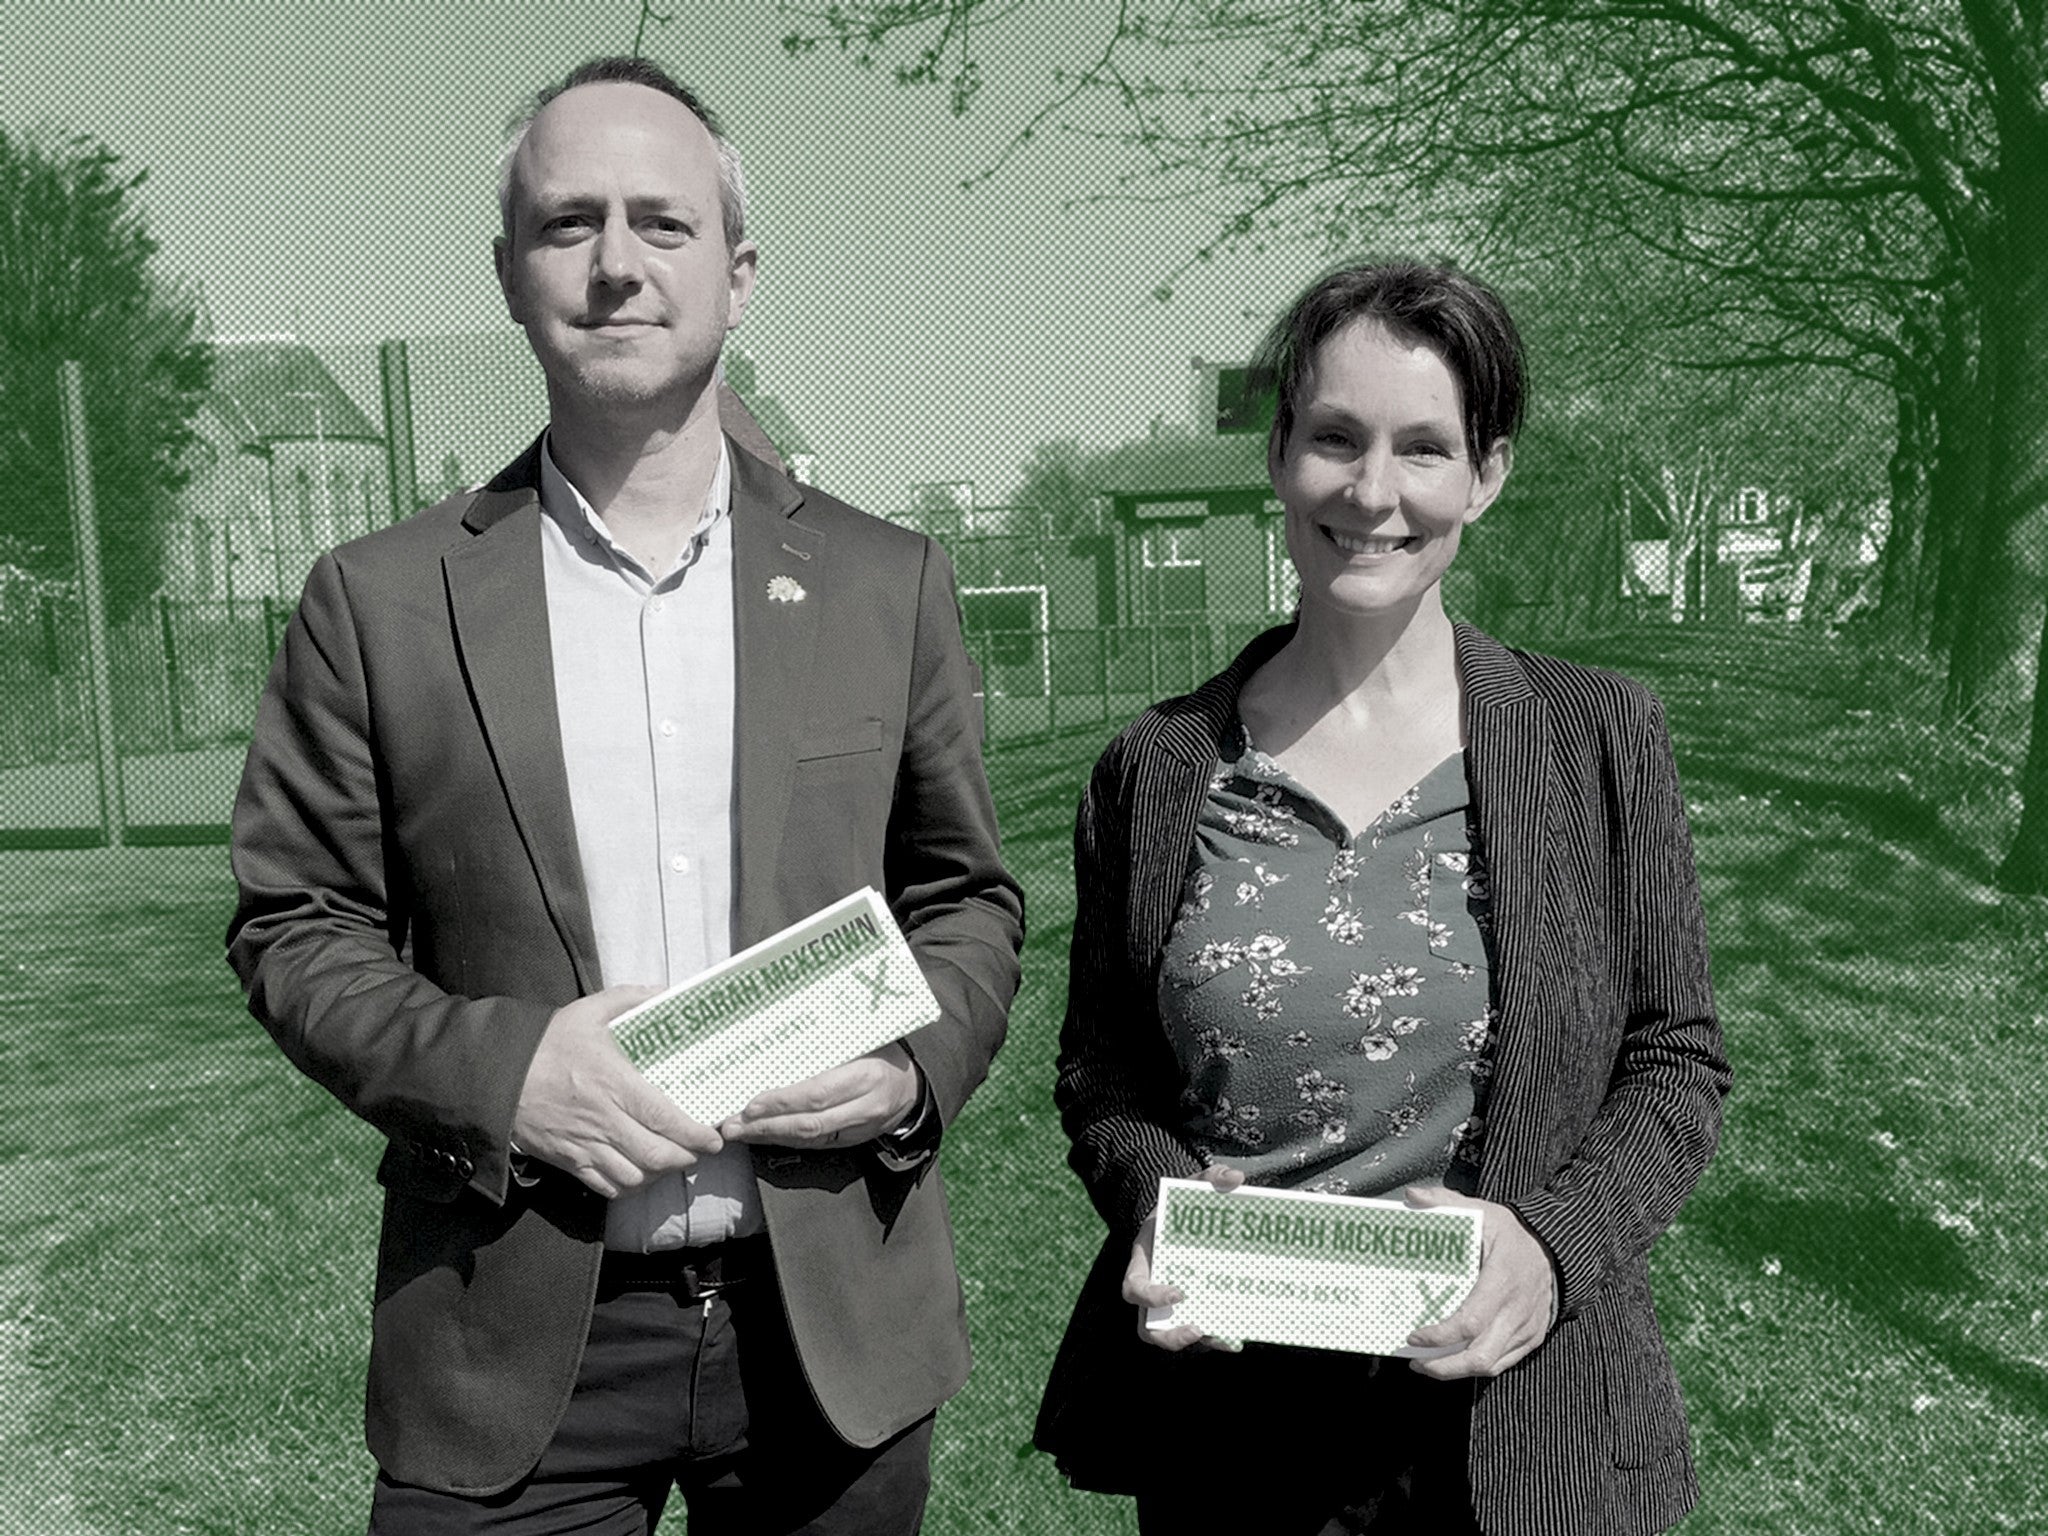 Councillor David Francis and his fellow Green Party candidate in South Shields, Sarah McKeown